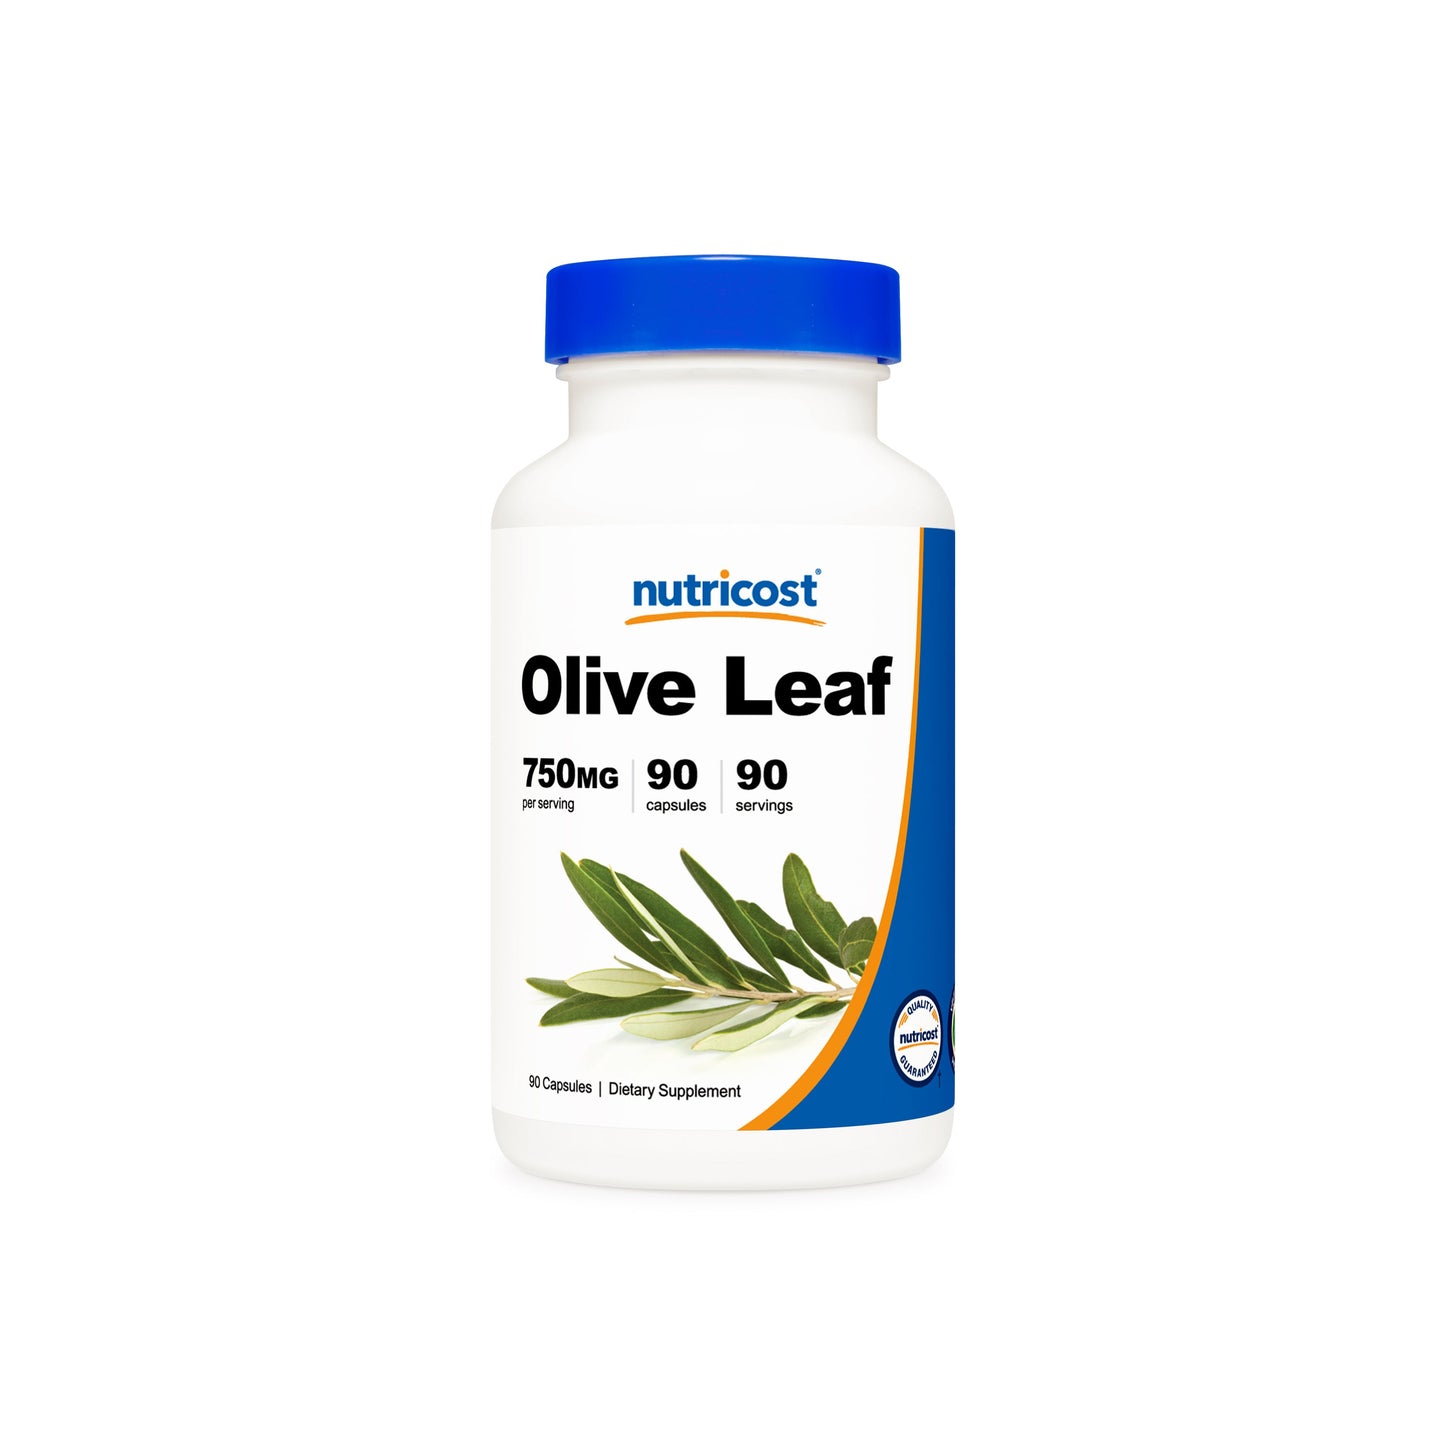 Nutricost Olive Leaf Capsules